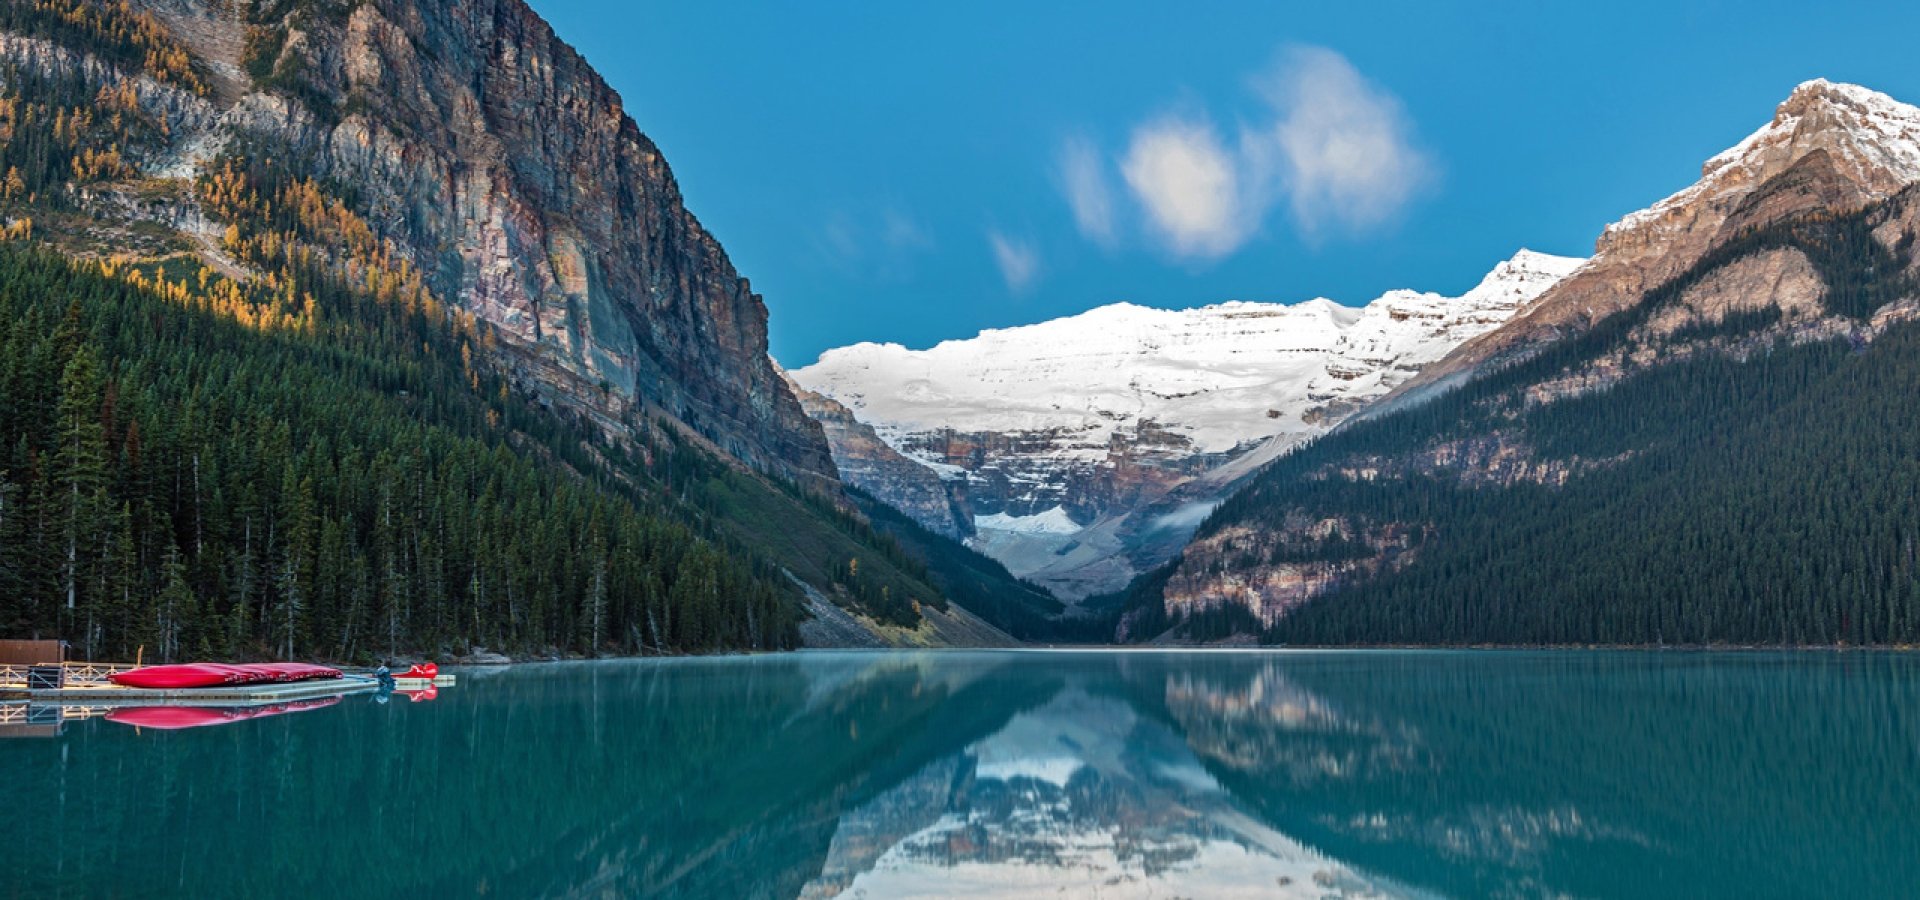 https://www.amtrakvacations.ca/sites/amtrak/files/styles/hero/public/images/1.-Lake-Louise-in-Banff-National-Park-1800x600.jpg?h=3a3df0c5&itok=LygUrs4S